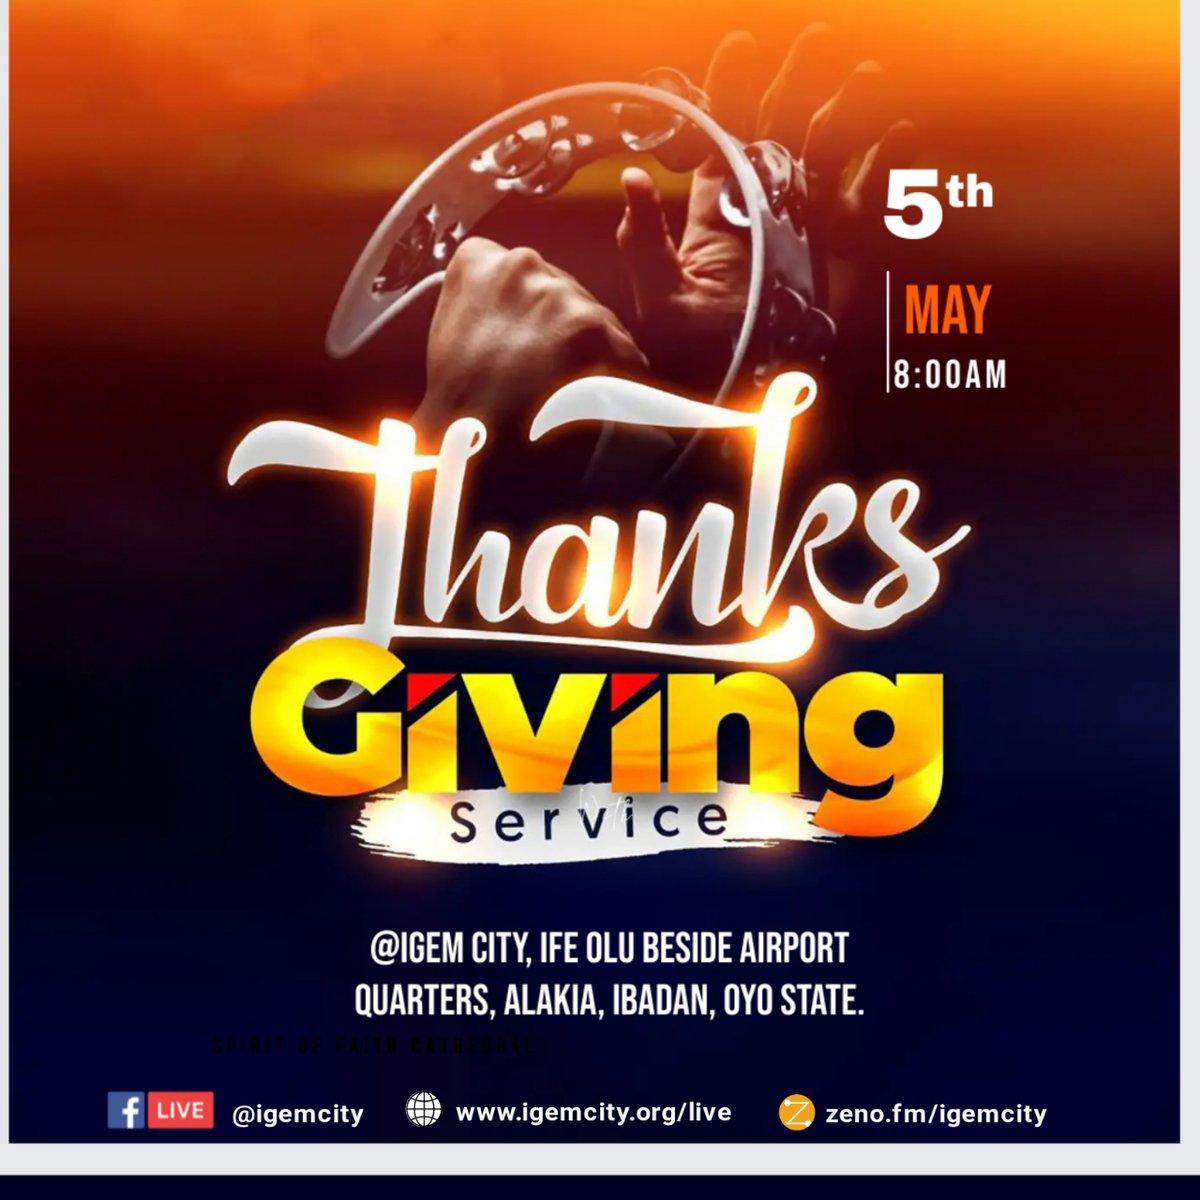 Psalm 92:1 - It is a good thing to give thanks unto the LORD, and to sing praises unto thy name, O most High. You are cordially invited to Thanksgiving service. #igem #thanksgivingservice #praises #gratefulheart